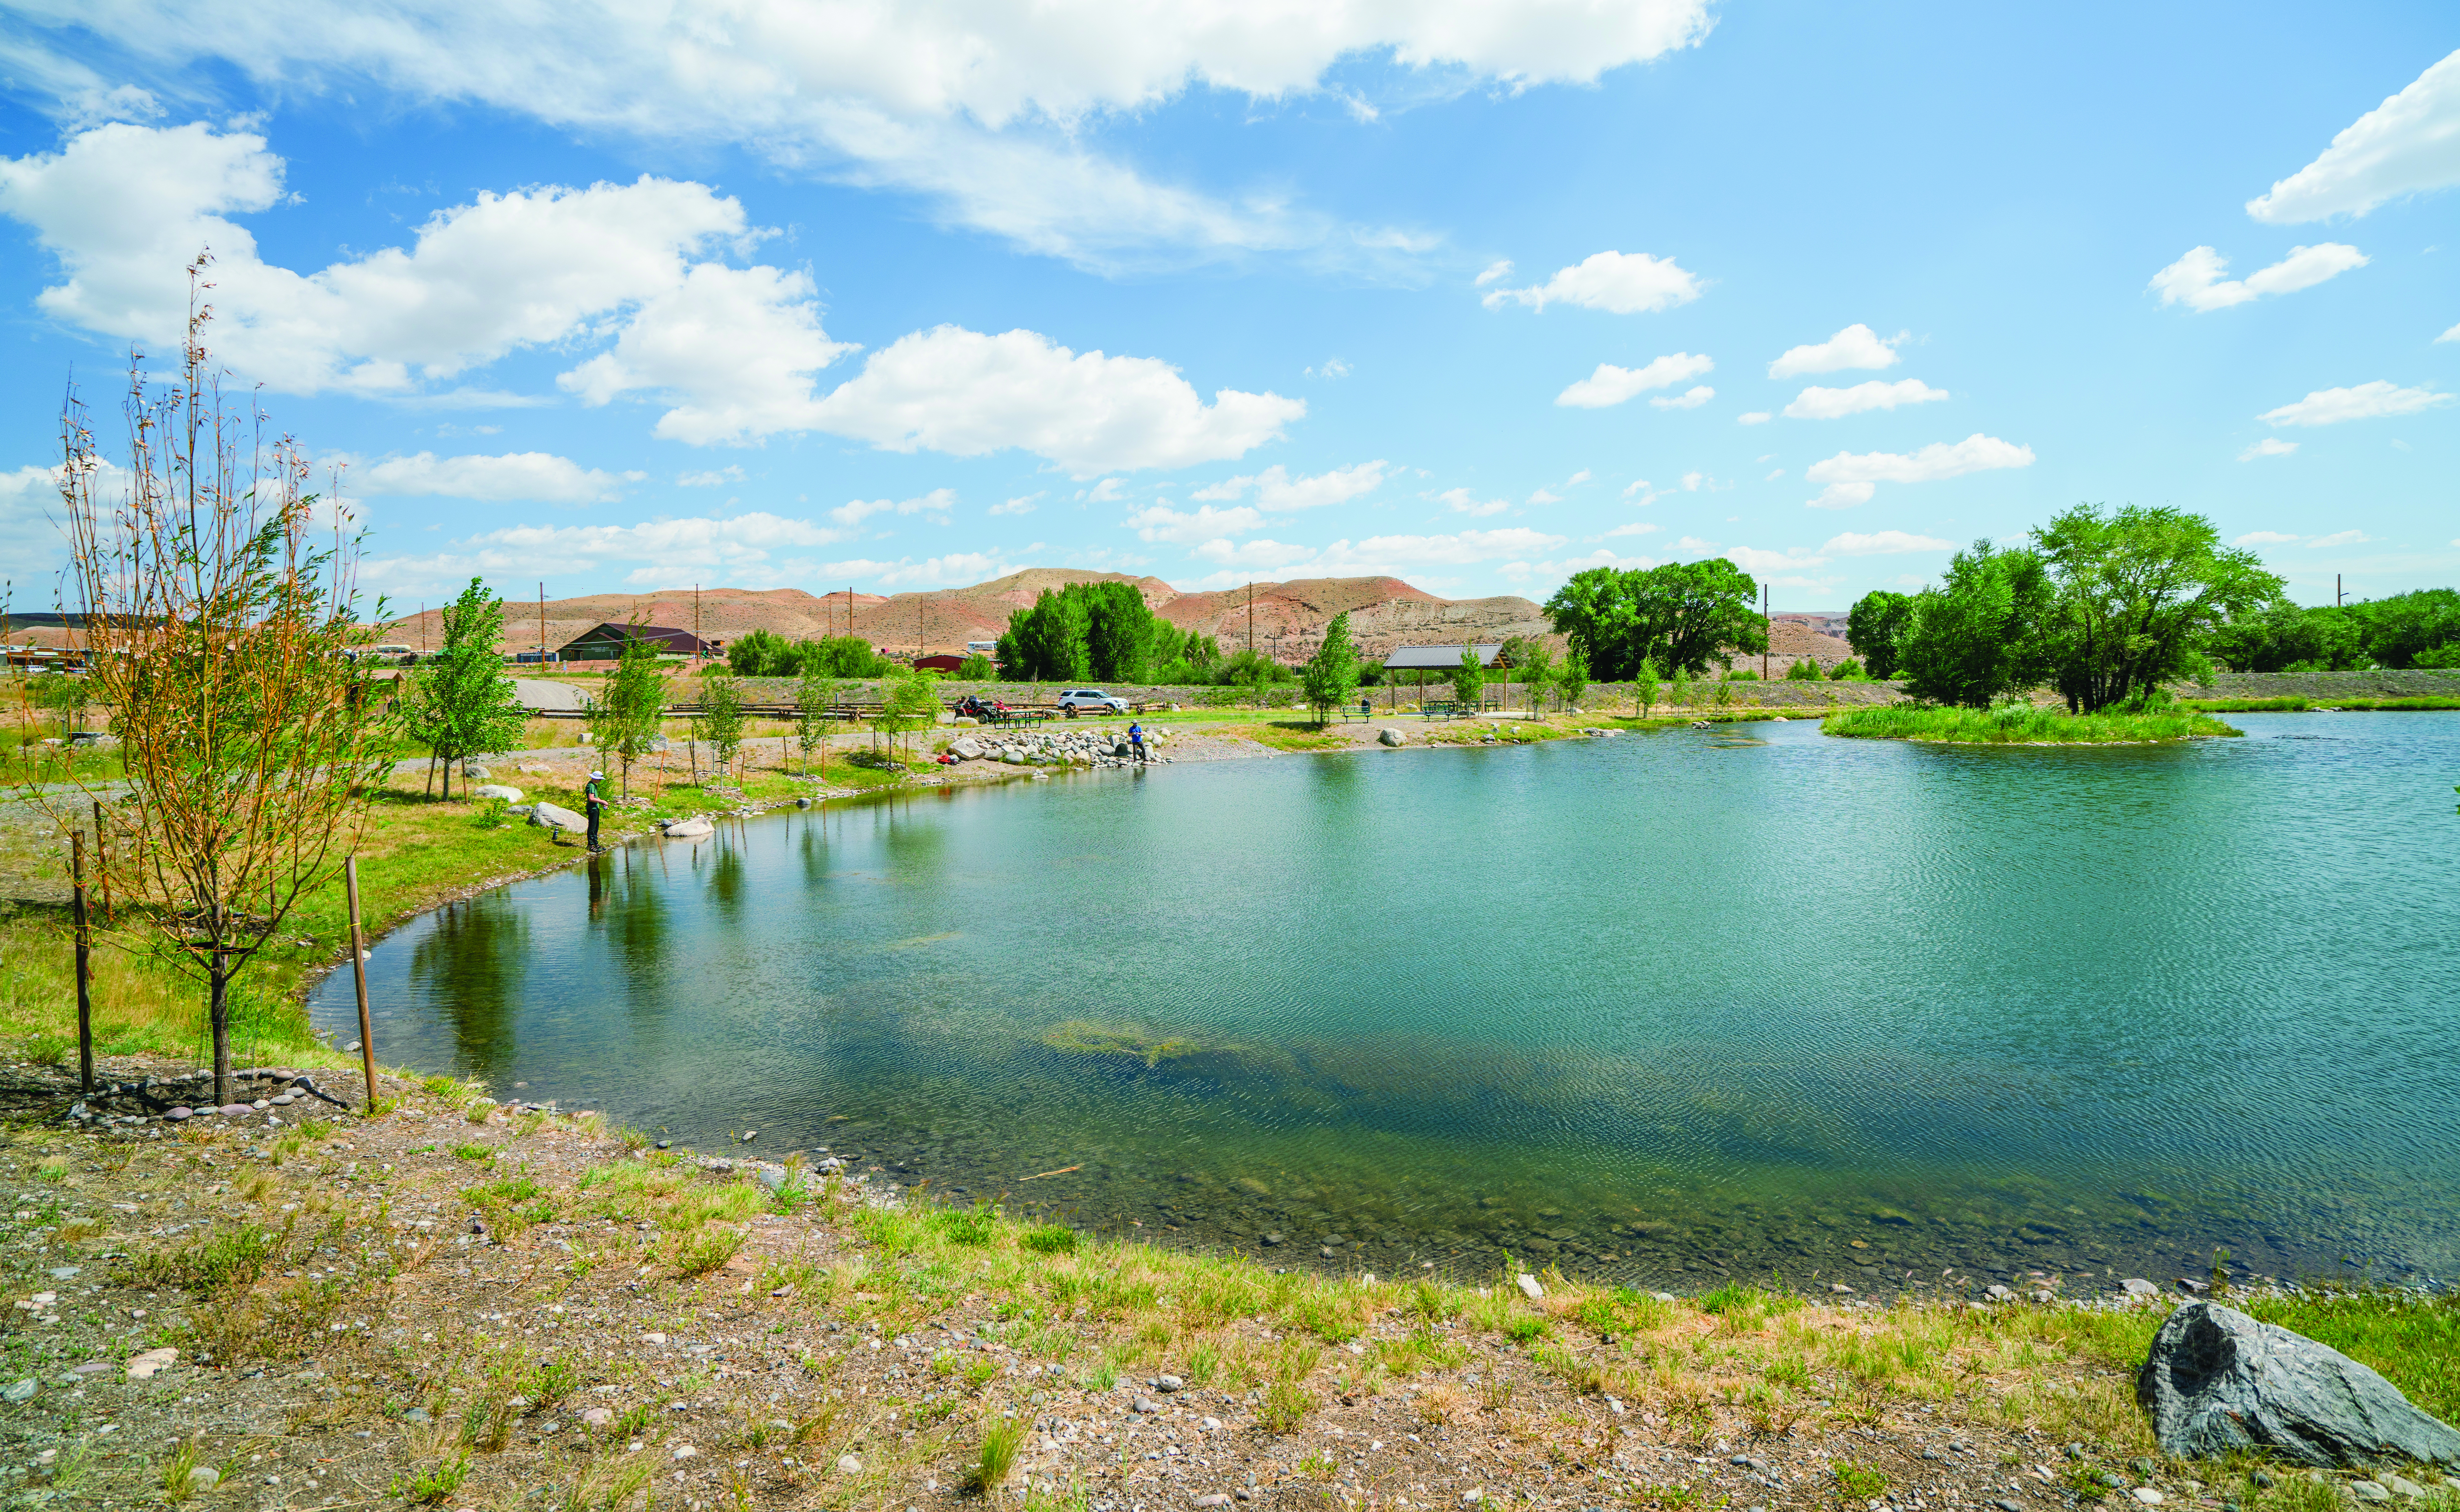 A landscape photo of Pete's Pond near Dubois Wyoming with a partly cloudy sky